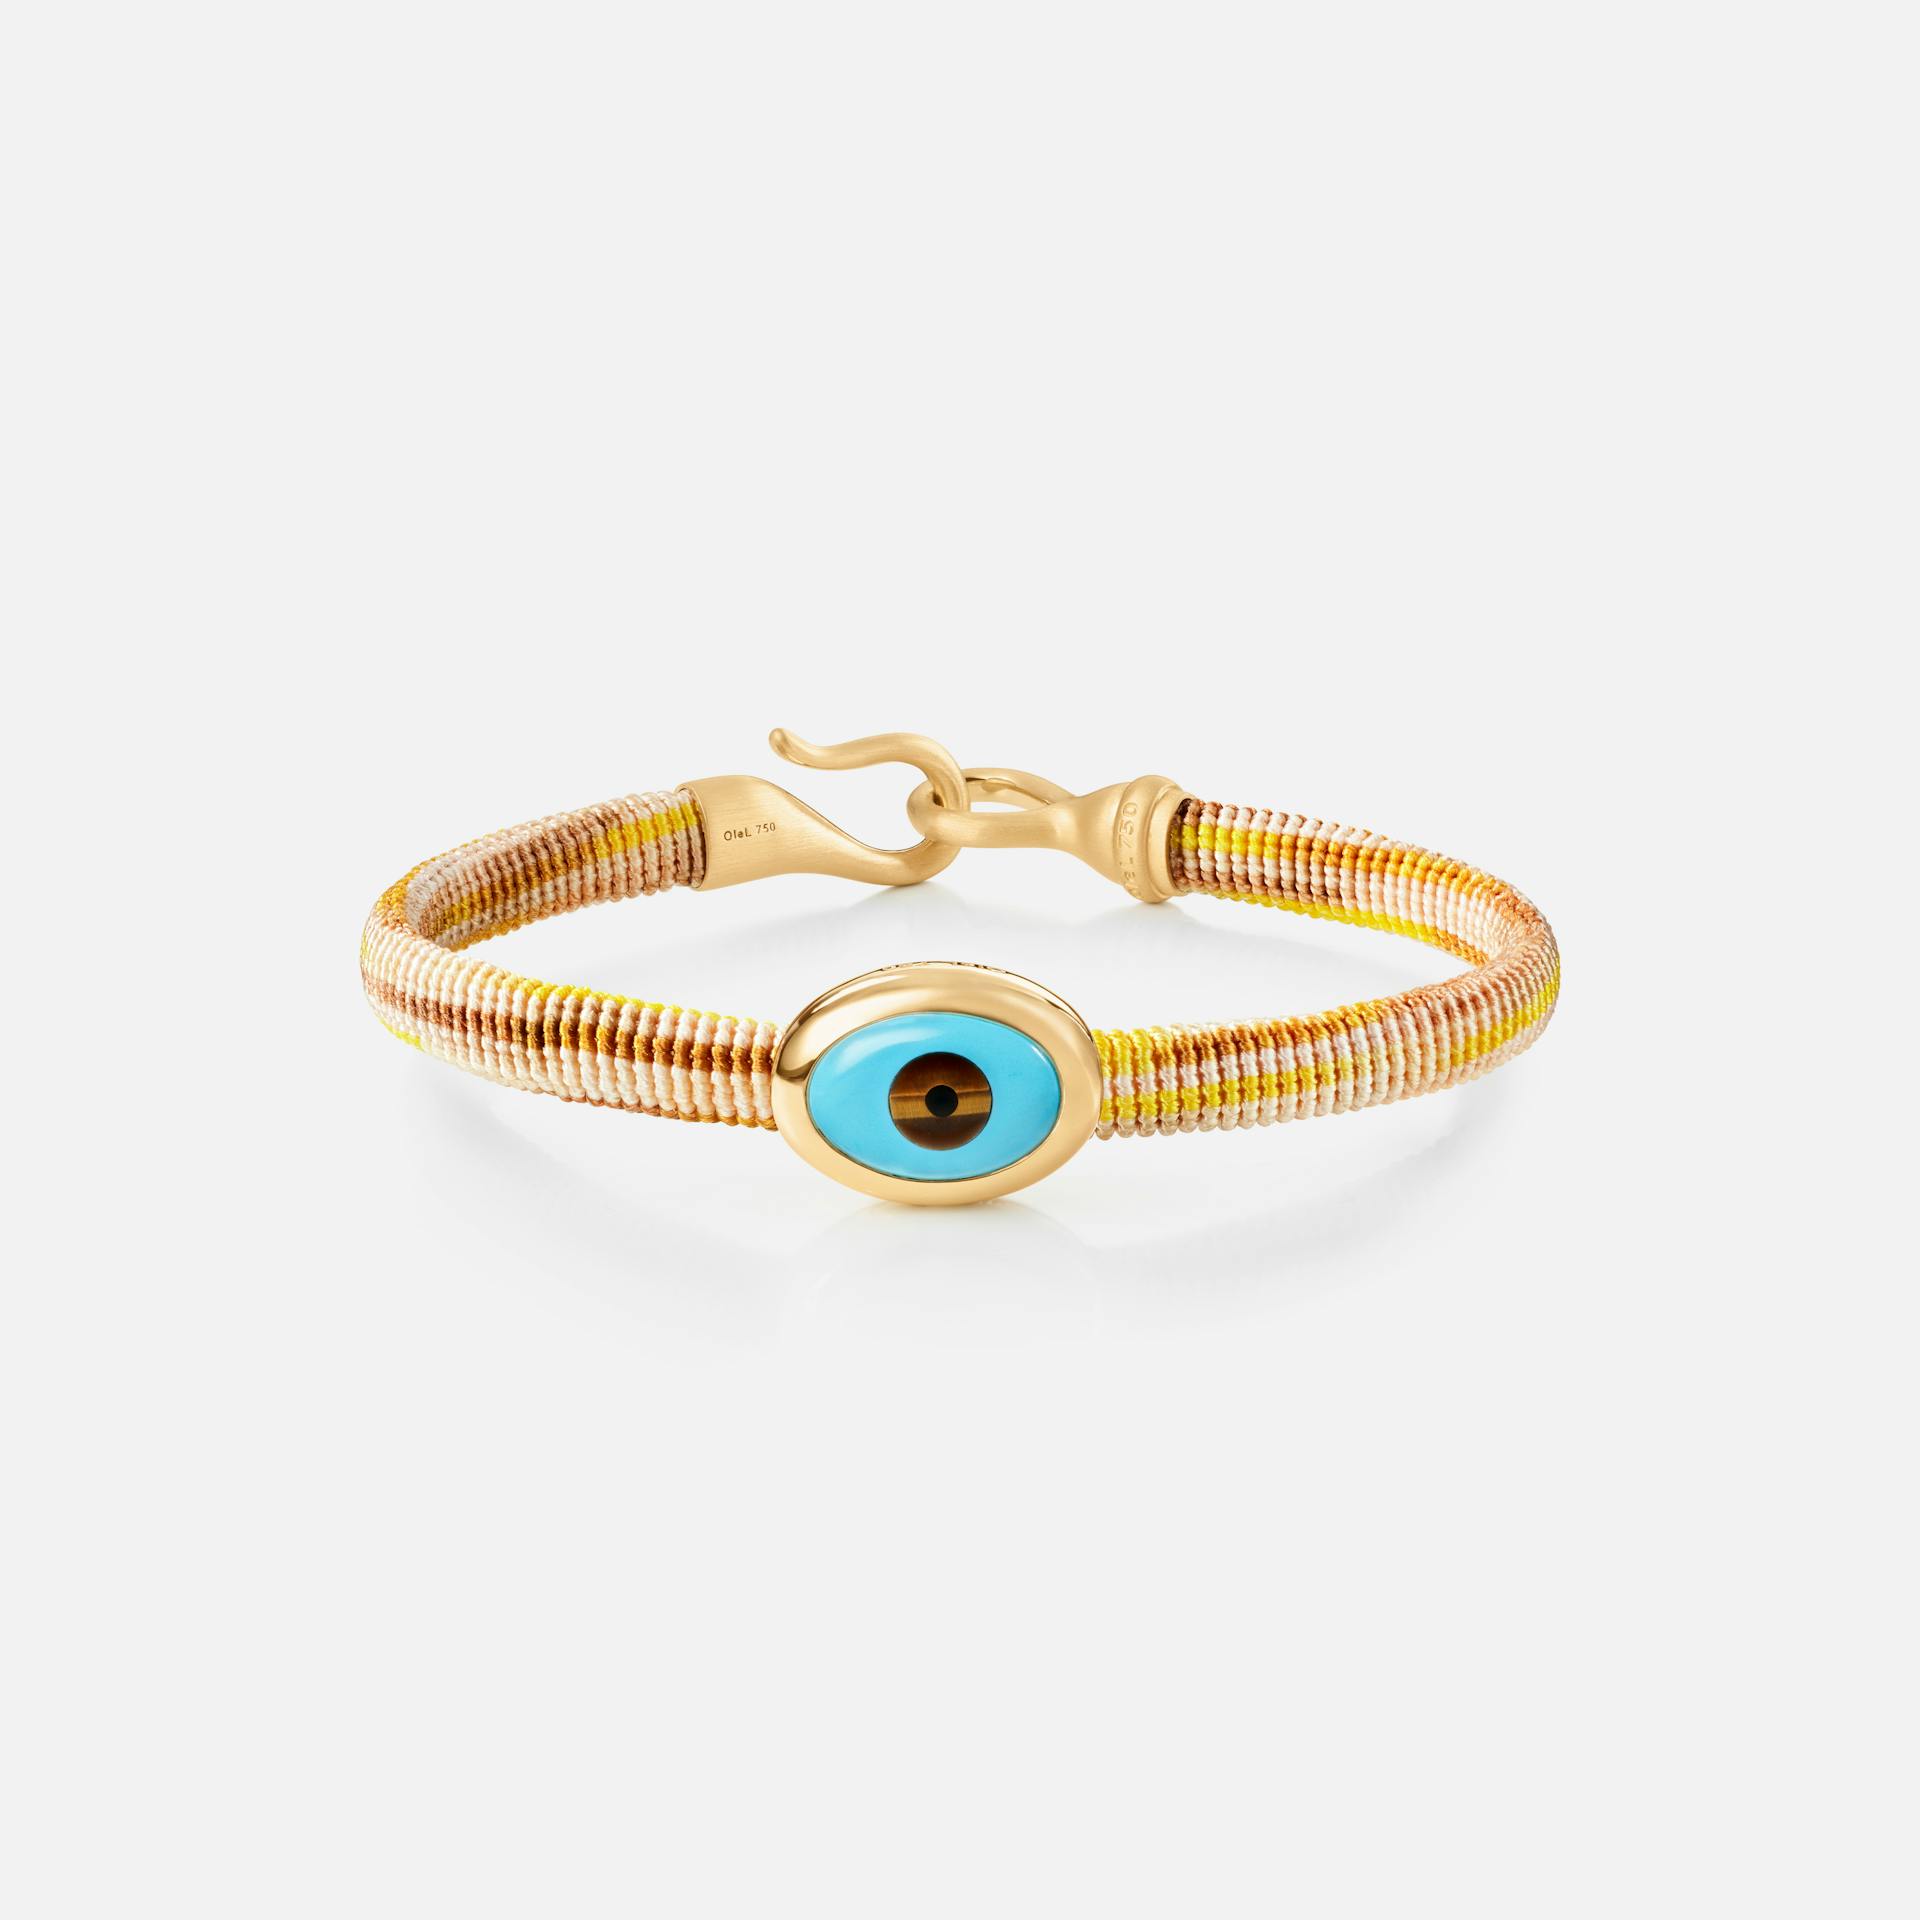 Life Bracelet with evil eye 6 mm 18k gold and turquoise with Golden rope